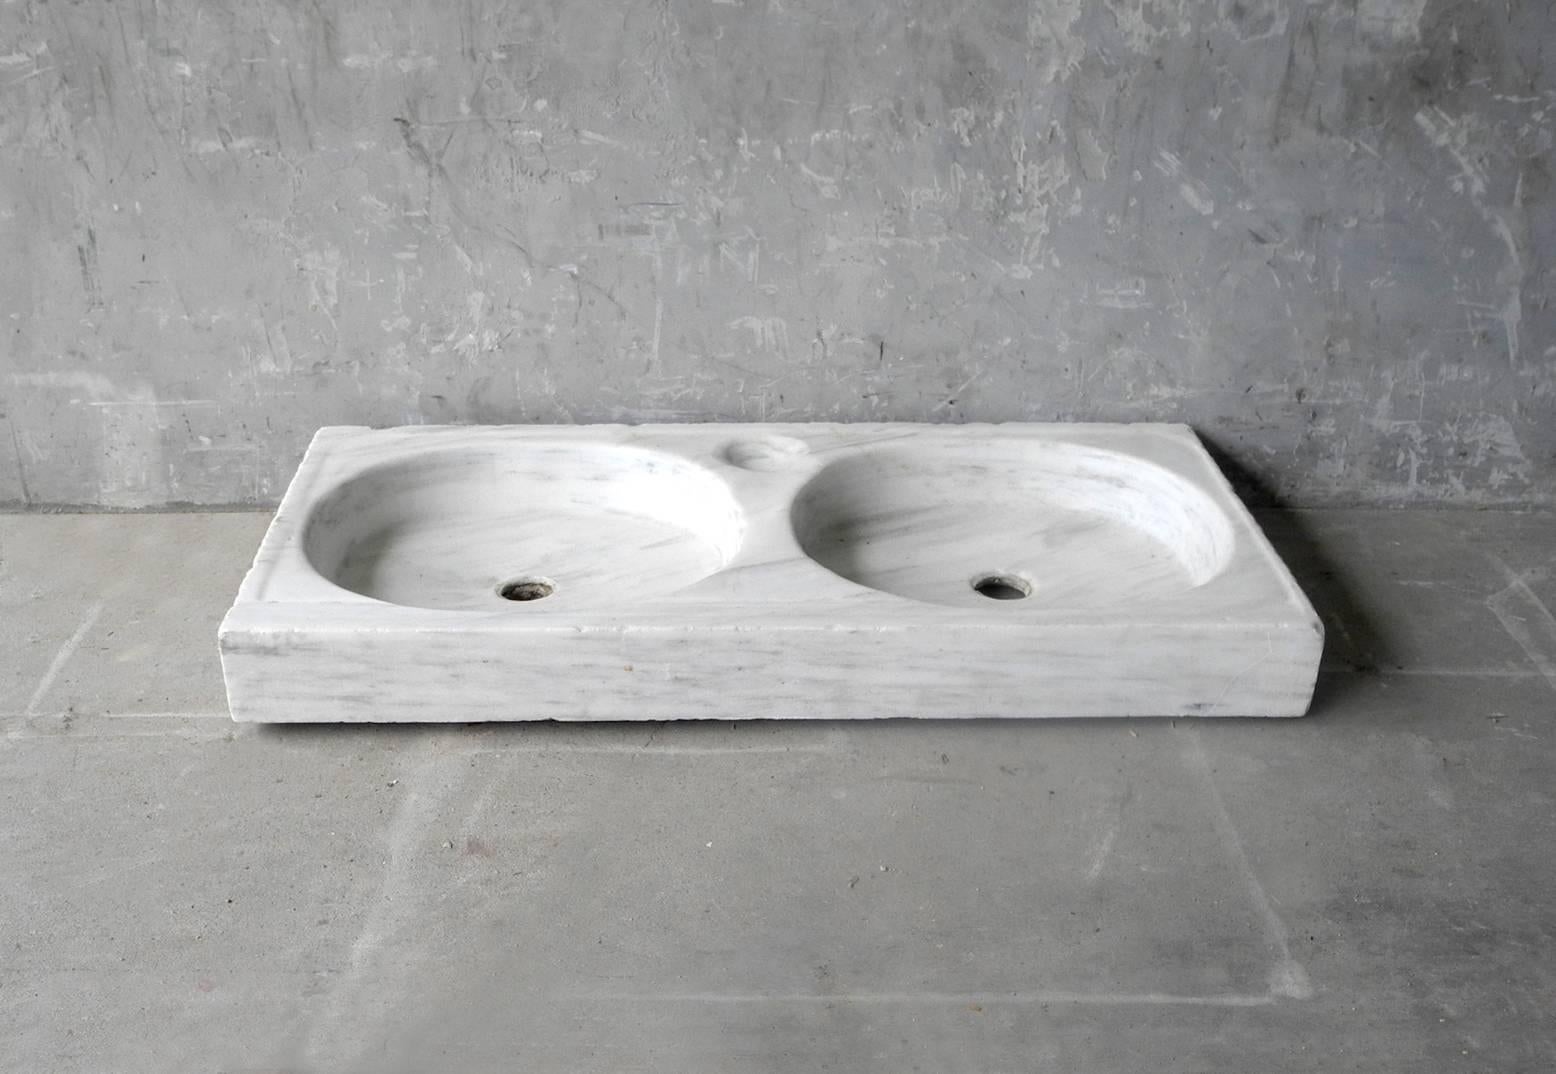 This 18th century item is double white marble sink from a bastide in Provence. It is luxurious in feel due to its material. It is very large in size - working well in a master bathroom. It is in wonderful condition, with barely any patina or aged